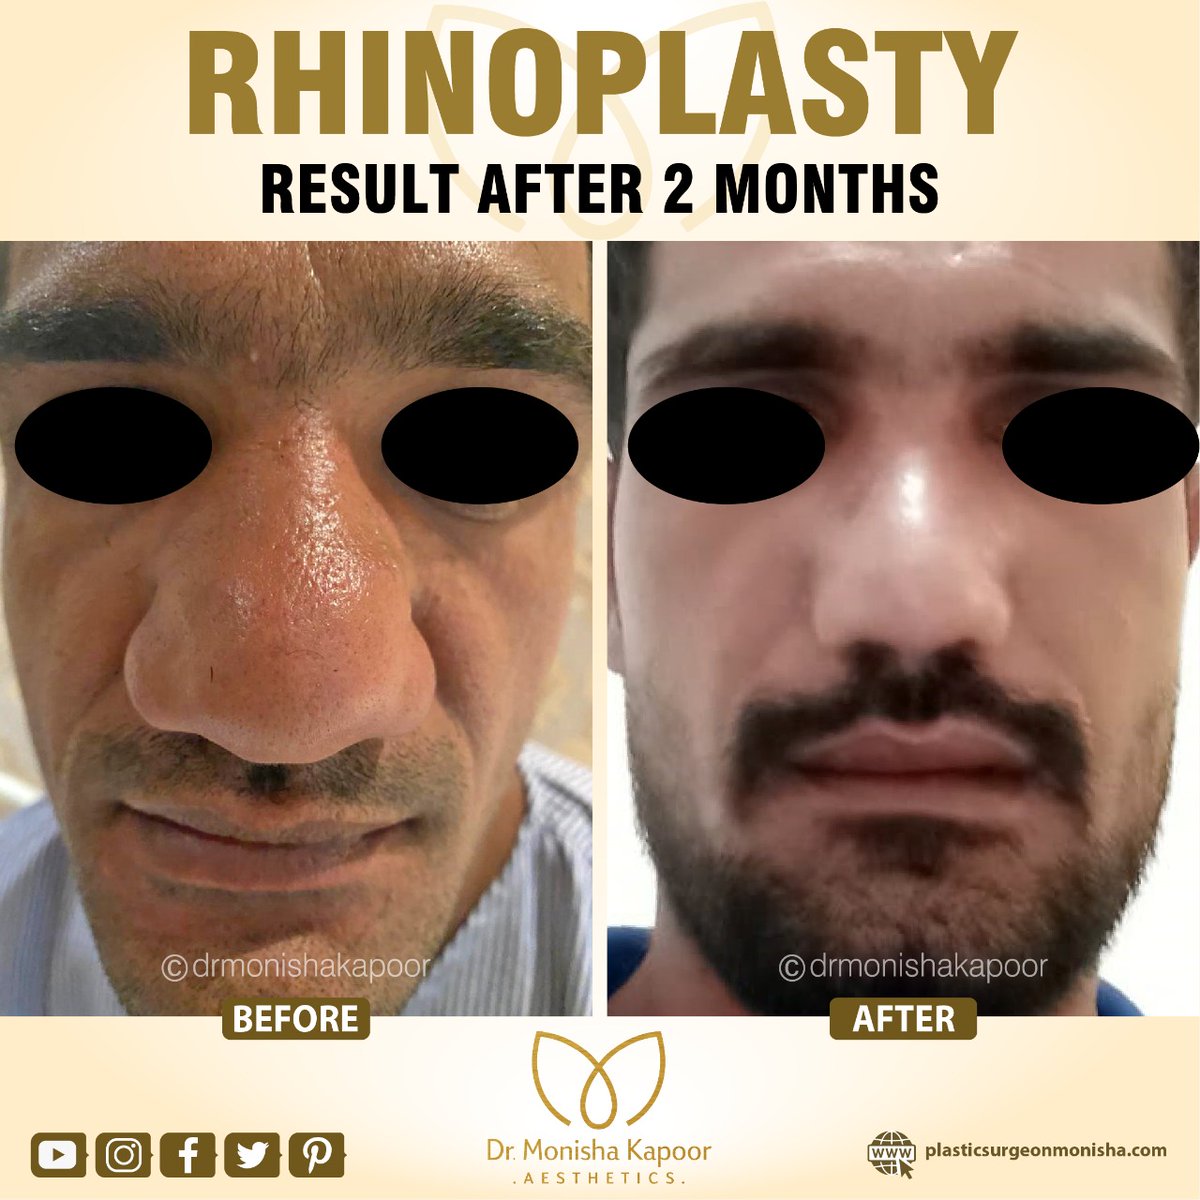 It's not easy to thin a very broad nose with thick skin. But in this patient, you can see that how beautifully at 2 months his nose looks just right for his face. 

#surgery #nosesurgery #nosejobsurgeon #nosejobbeforeandafter #noseshape #revisionrhinoplasty #nosejobrevision